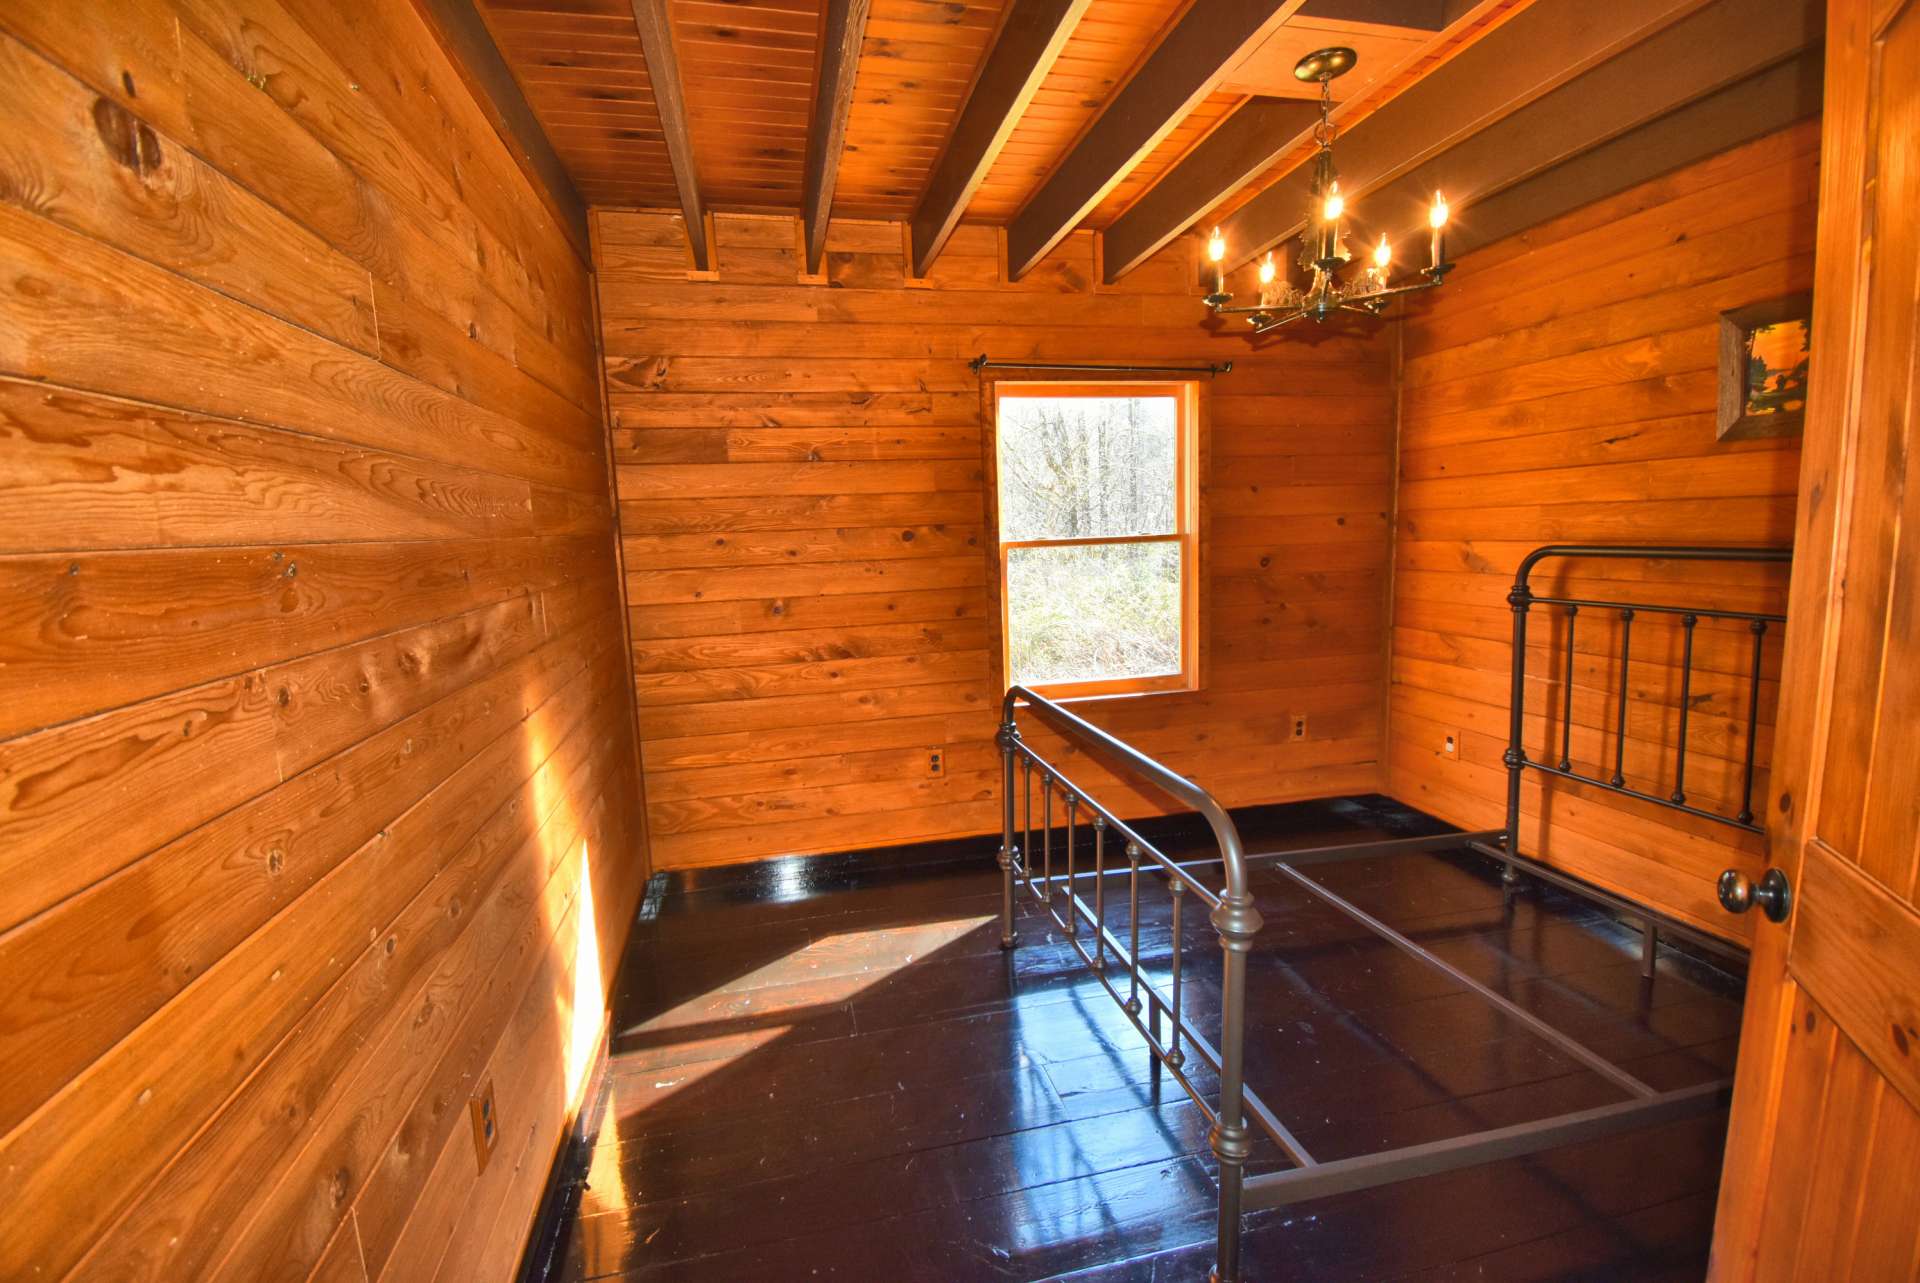 This is the main level  bedroom.  Notice exposed beams throughout the cabin. Wide plank wood floors in the great room and bedrooms.